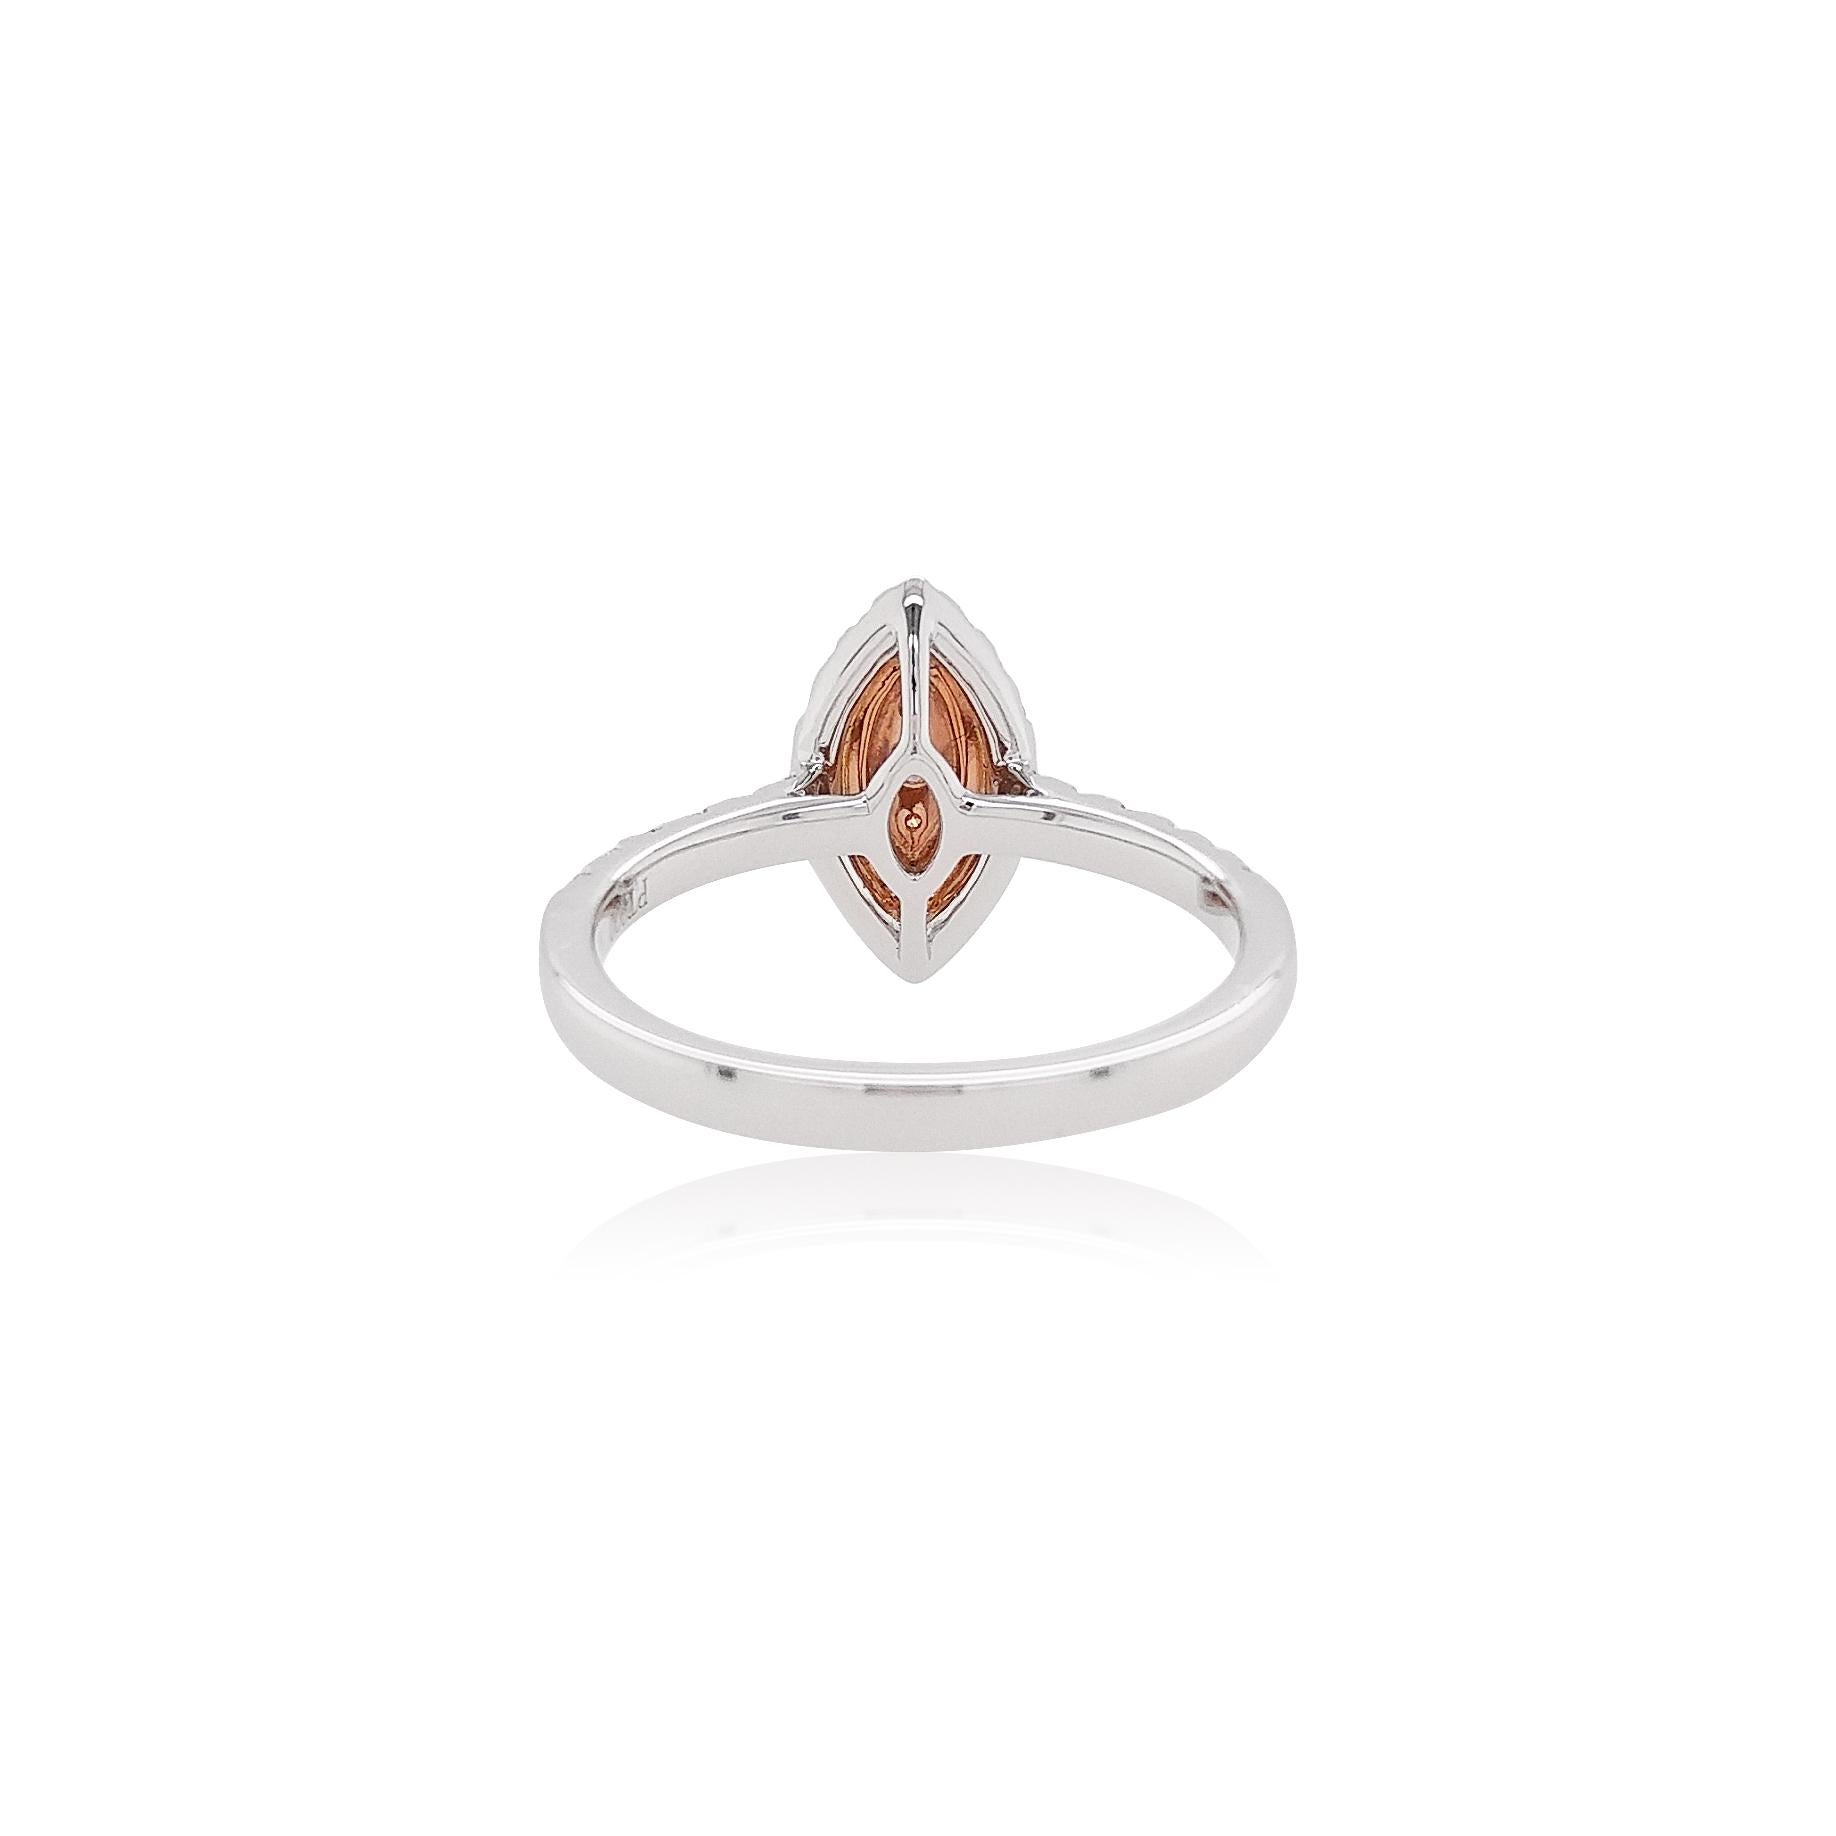 This delicate platinum ring features the lustrous Argyle pink diamonds at the forefront of its design. The spectacular hues of the pink diamonds are perfectly accentuated by the 18 Karat Pink Gold and platinum setting, and elegant diamond halo. A